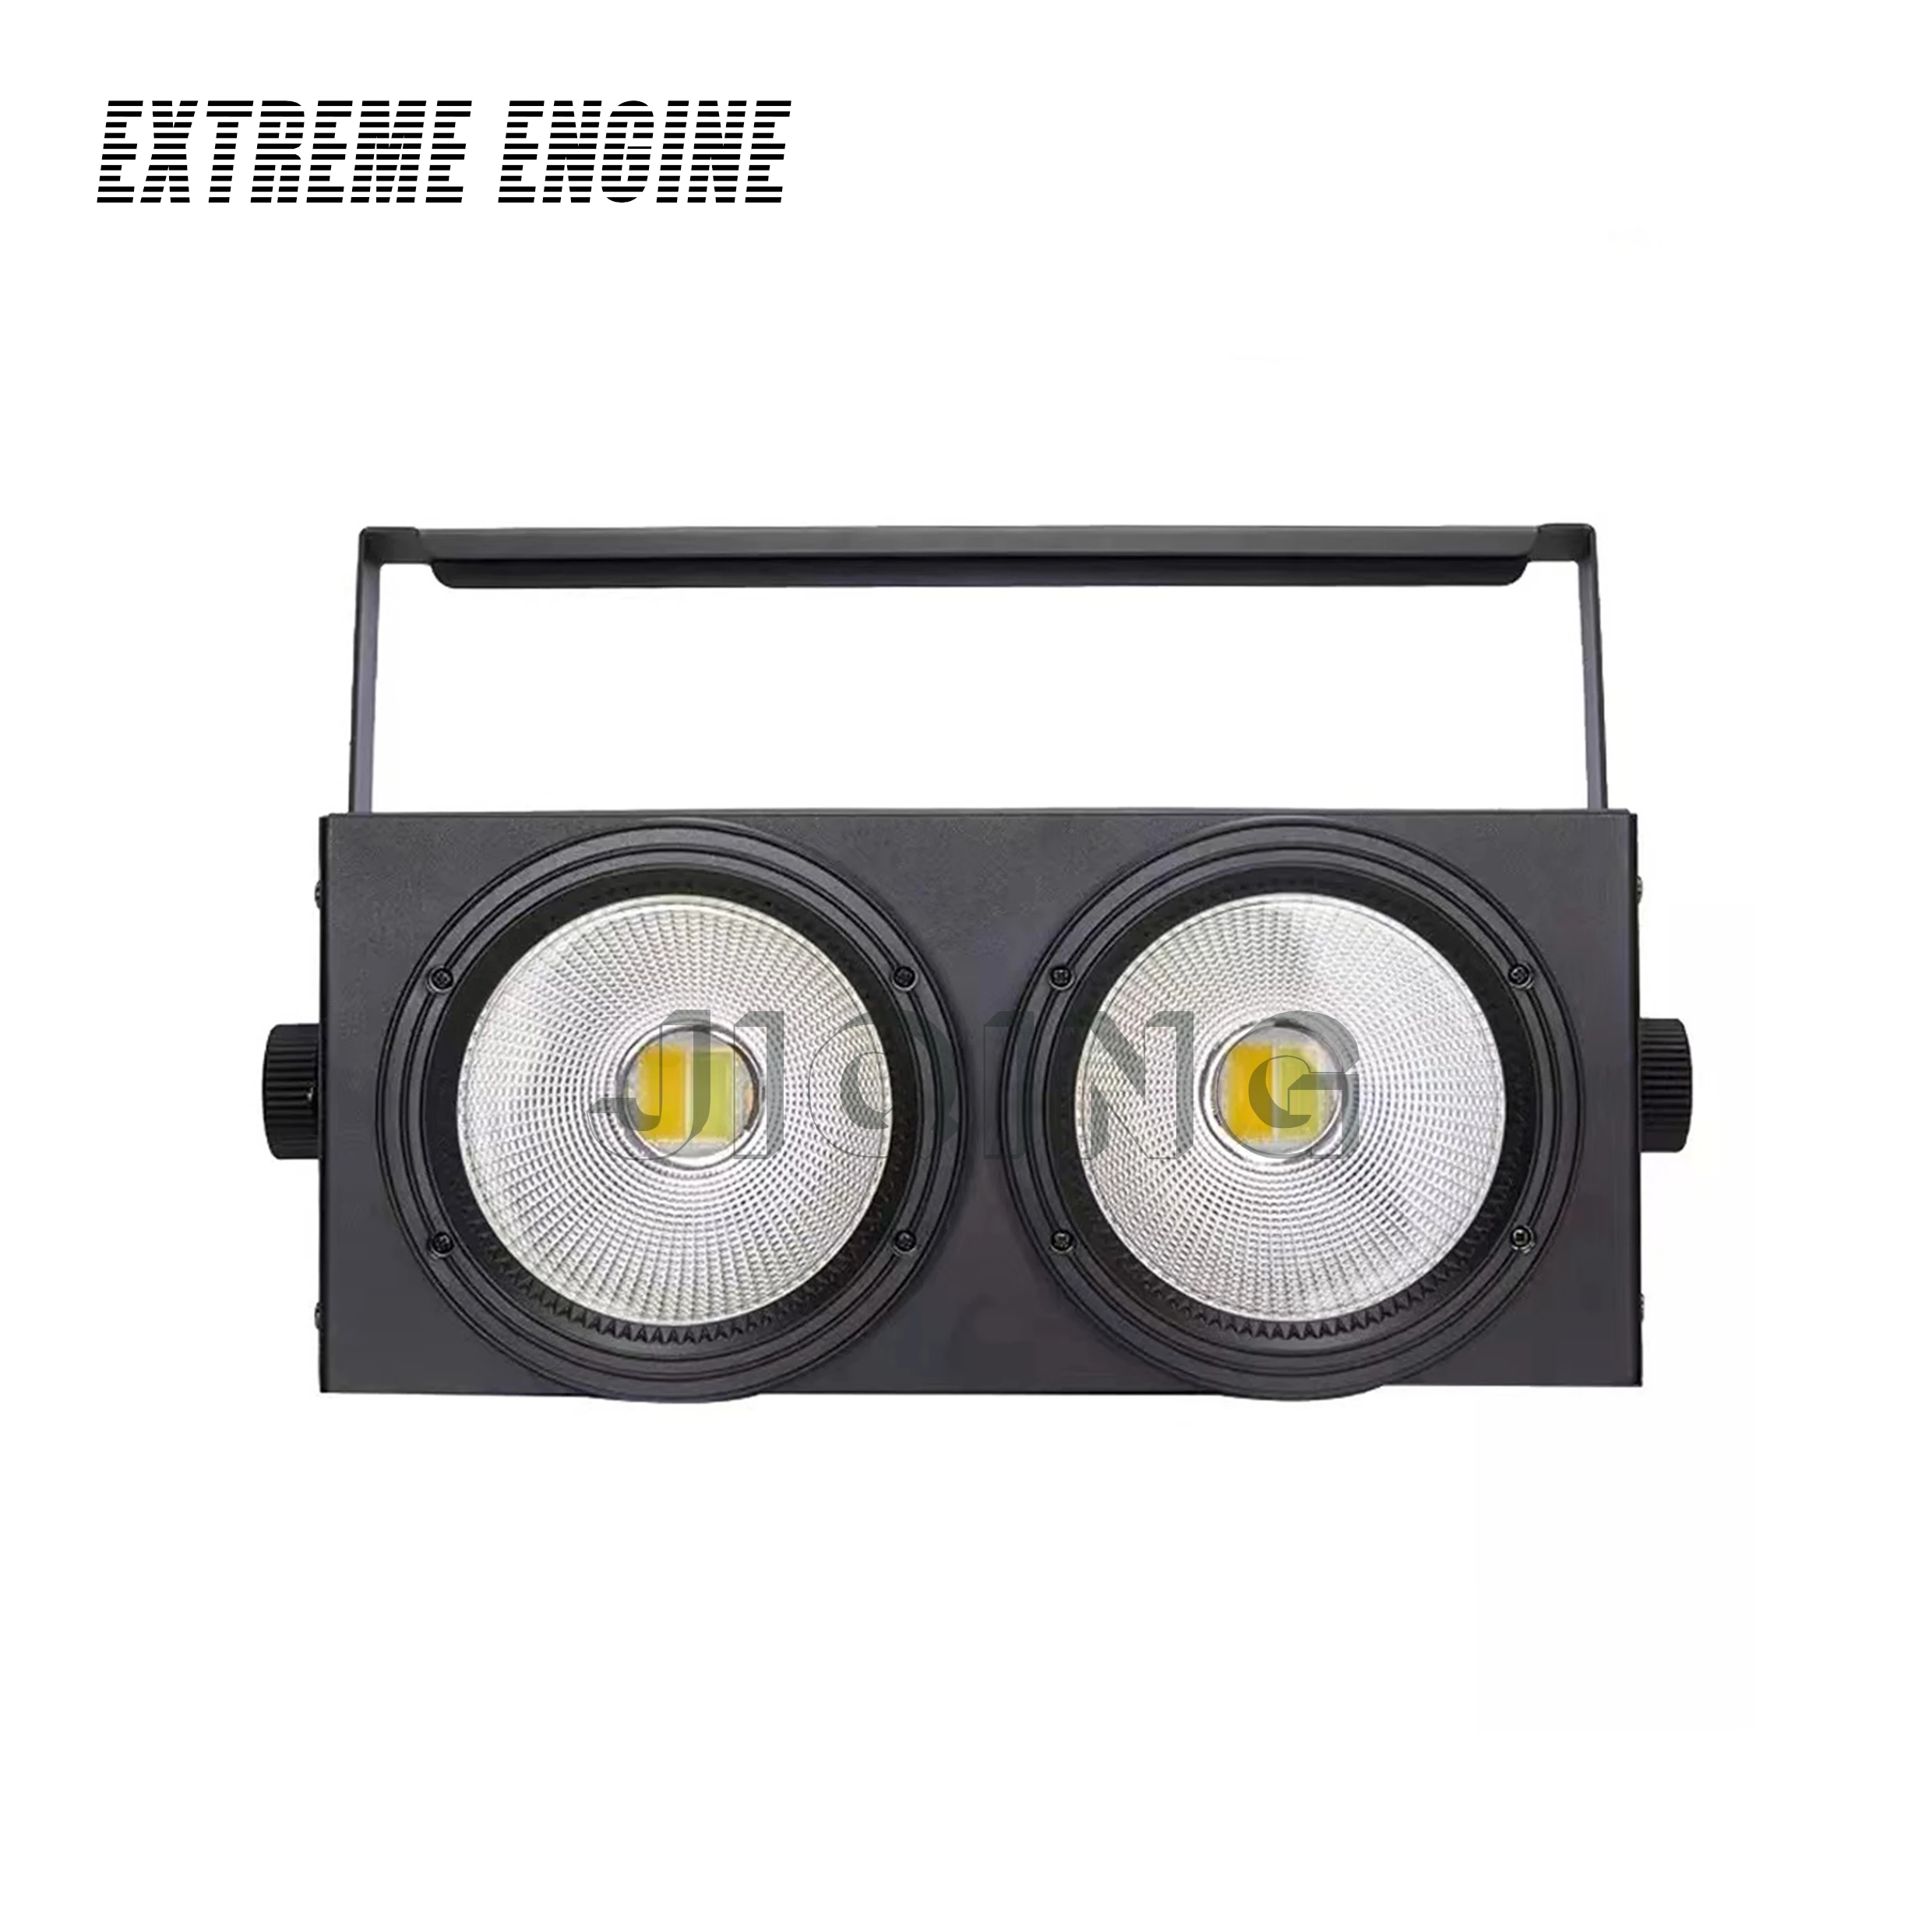 2 Eyes LED COB Blinder Light Cold White/Warm White 2in1 COB LEDs Control Optional Individually 2x100W Audience light